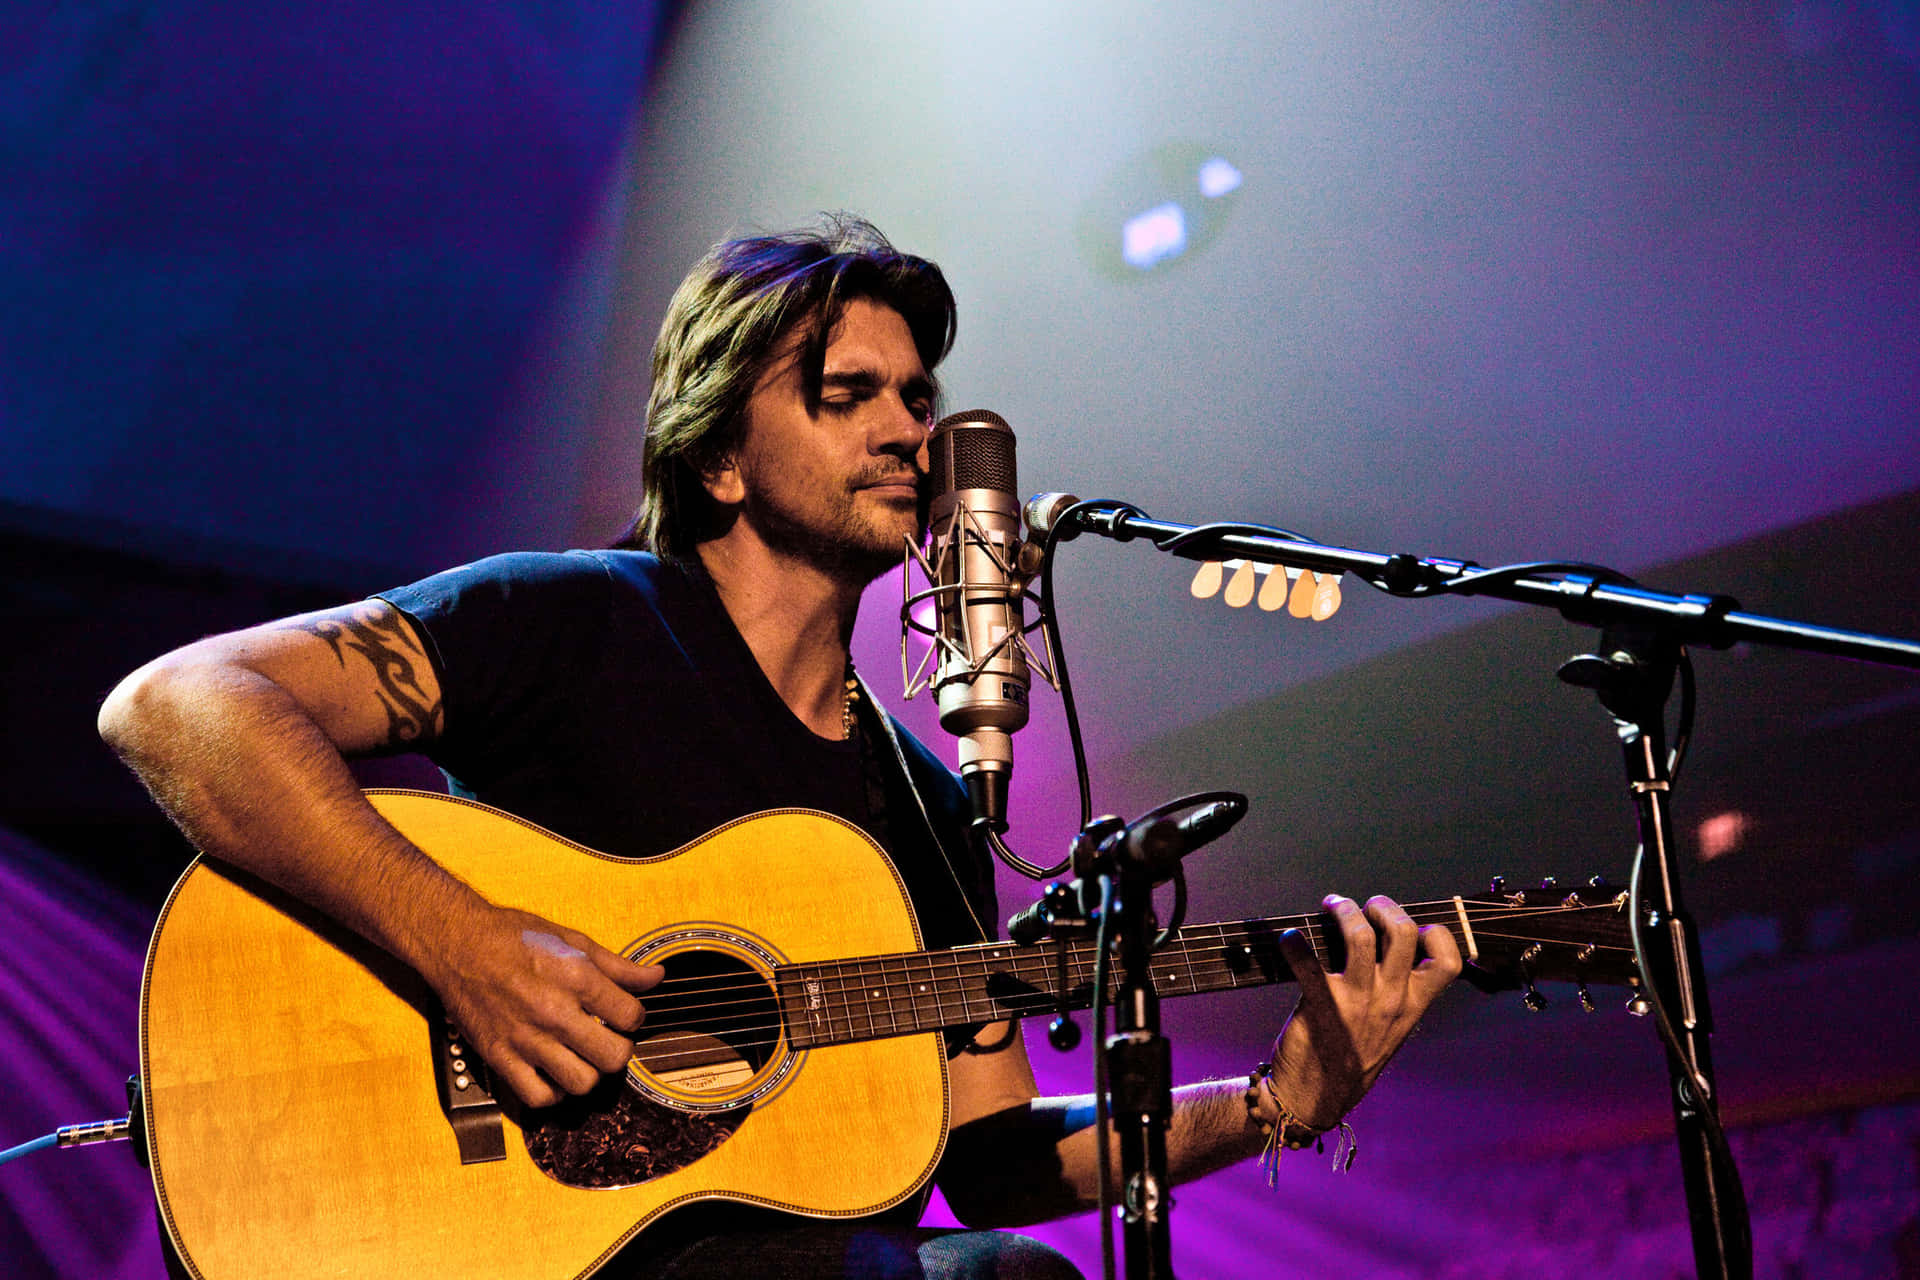 A Man Playing An Acoustic Guitar In Front Of A Microphone